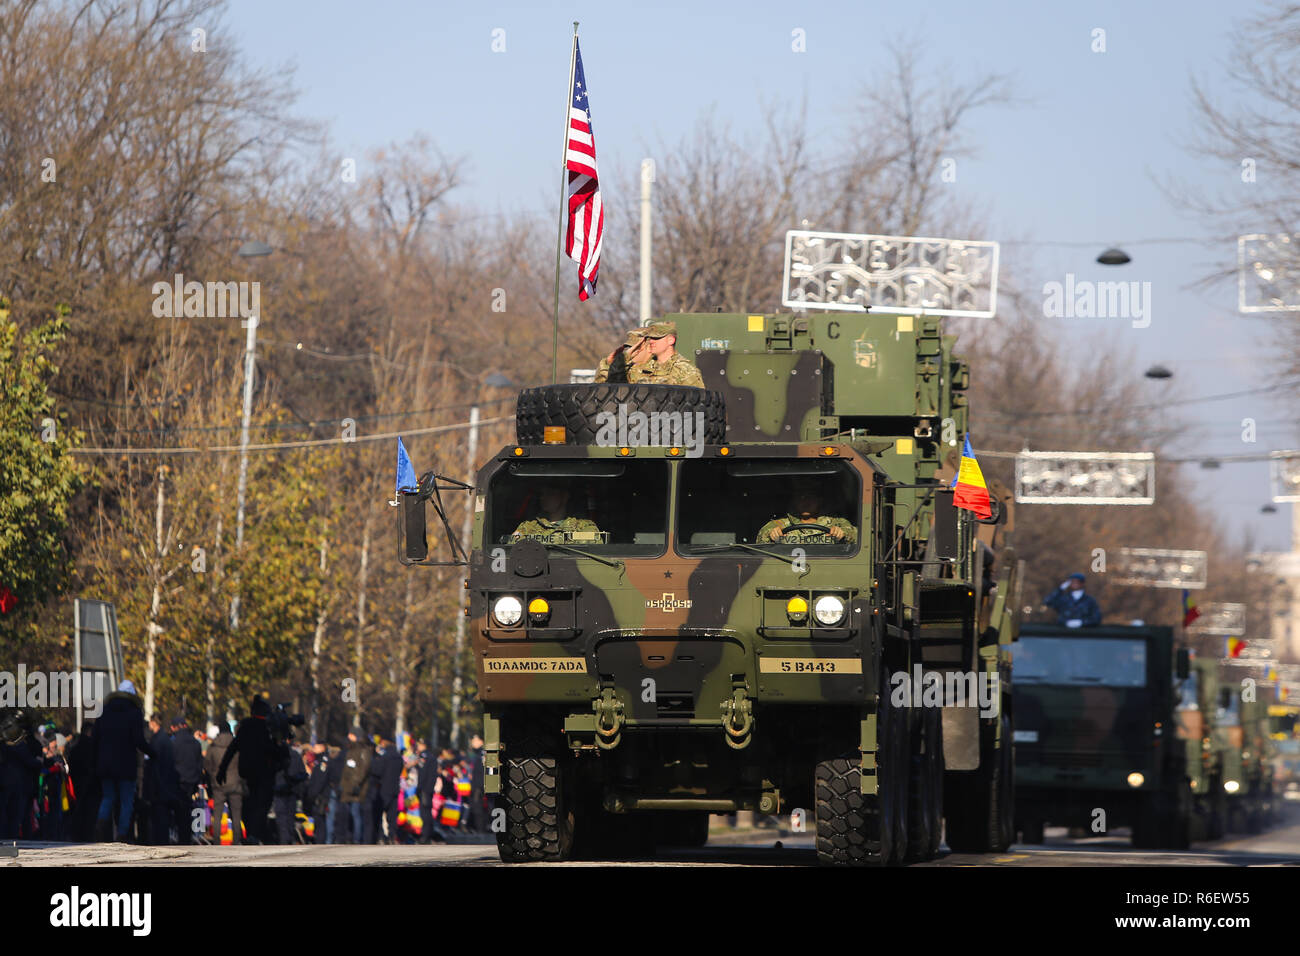 BUCHAREST, ROMANIA - December 1, 2018: US commander of a Patriot PAC 3+ surface-to-air missile (SAM) system at the Romanian National Day military para Stock Photo